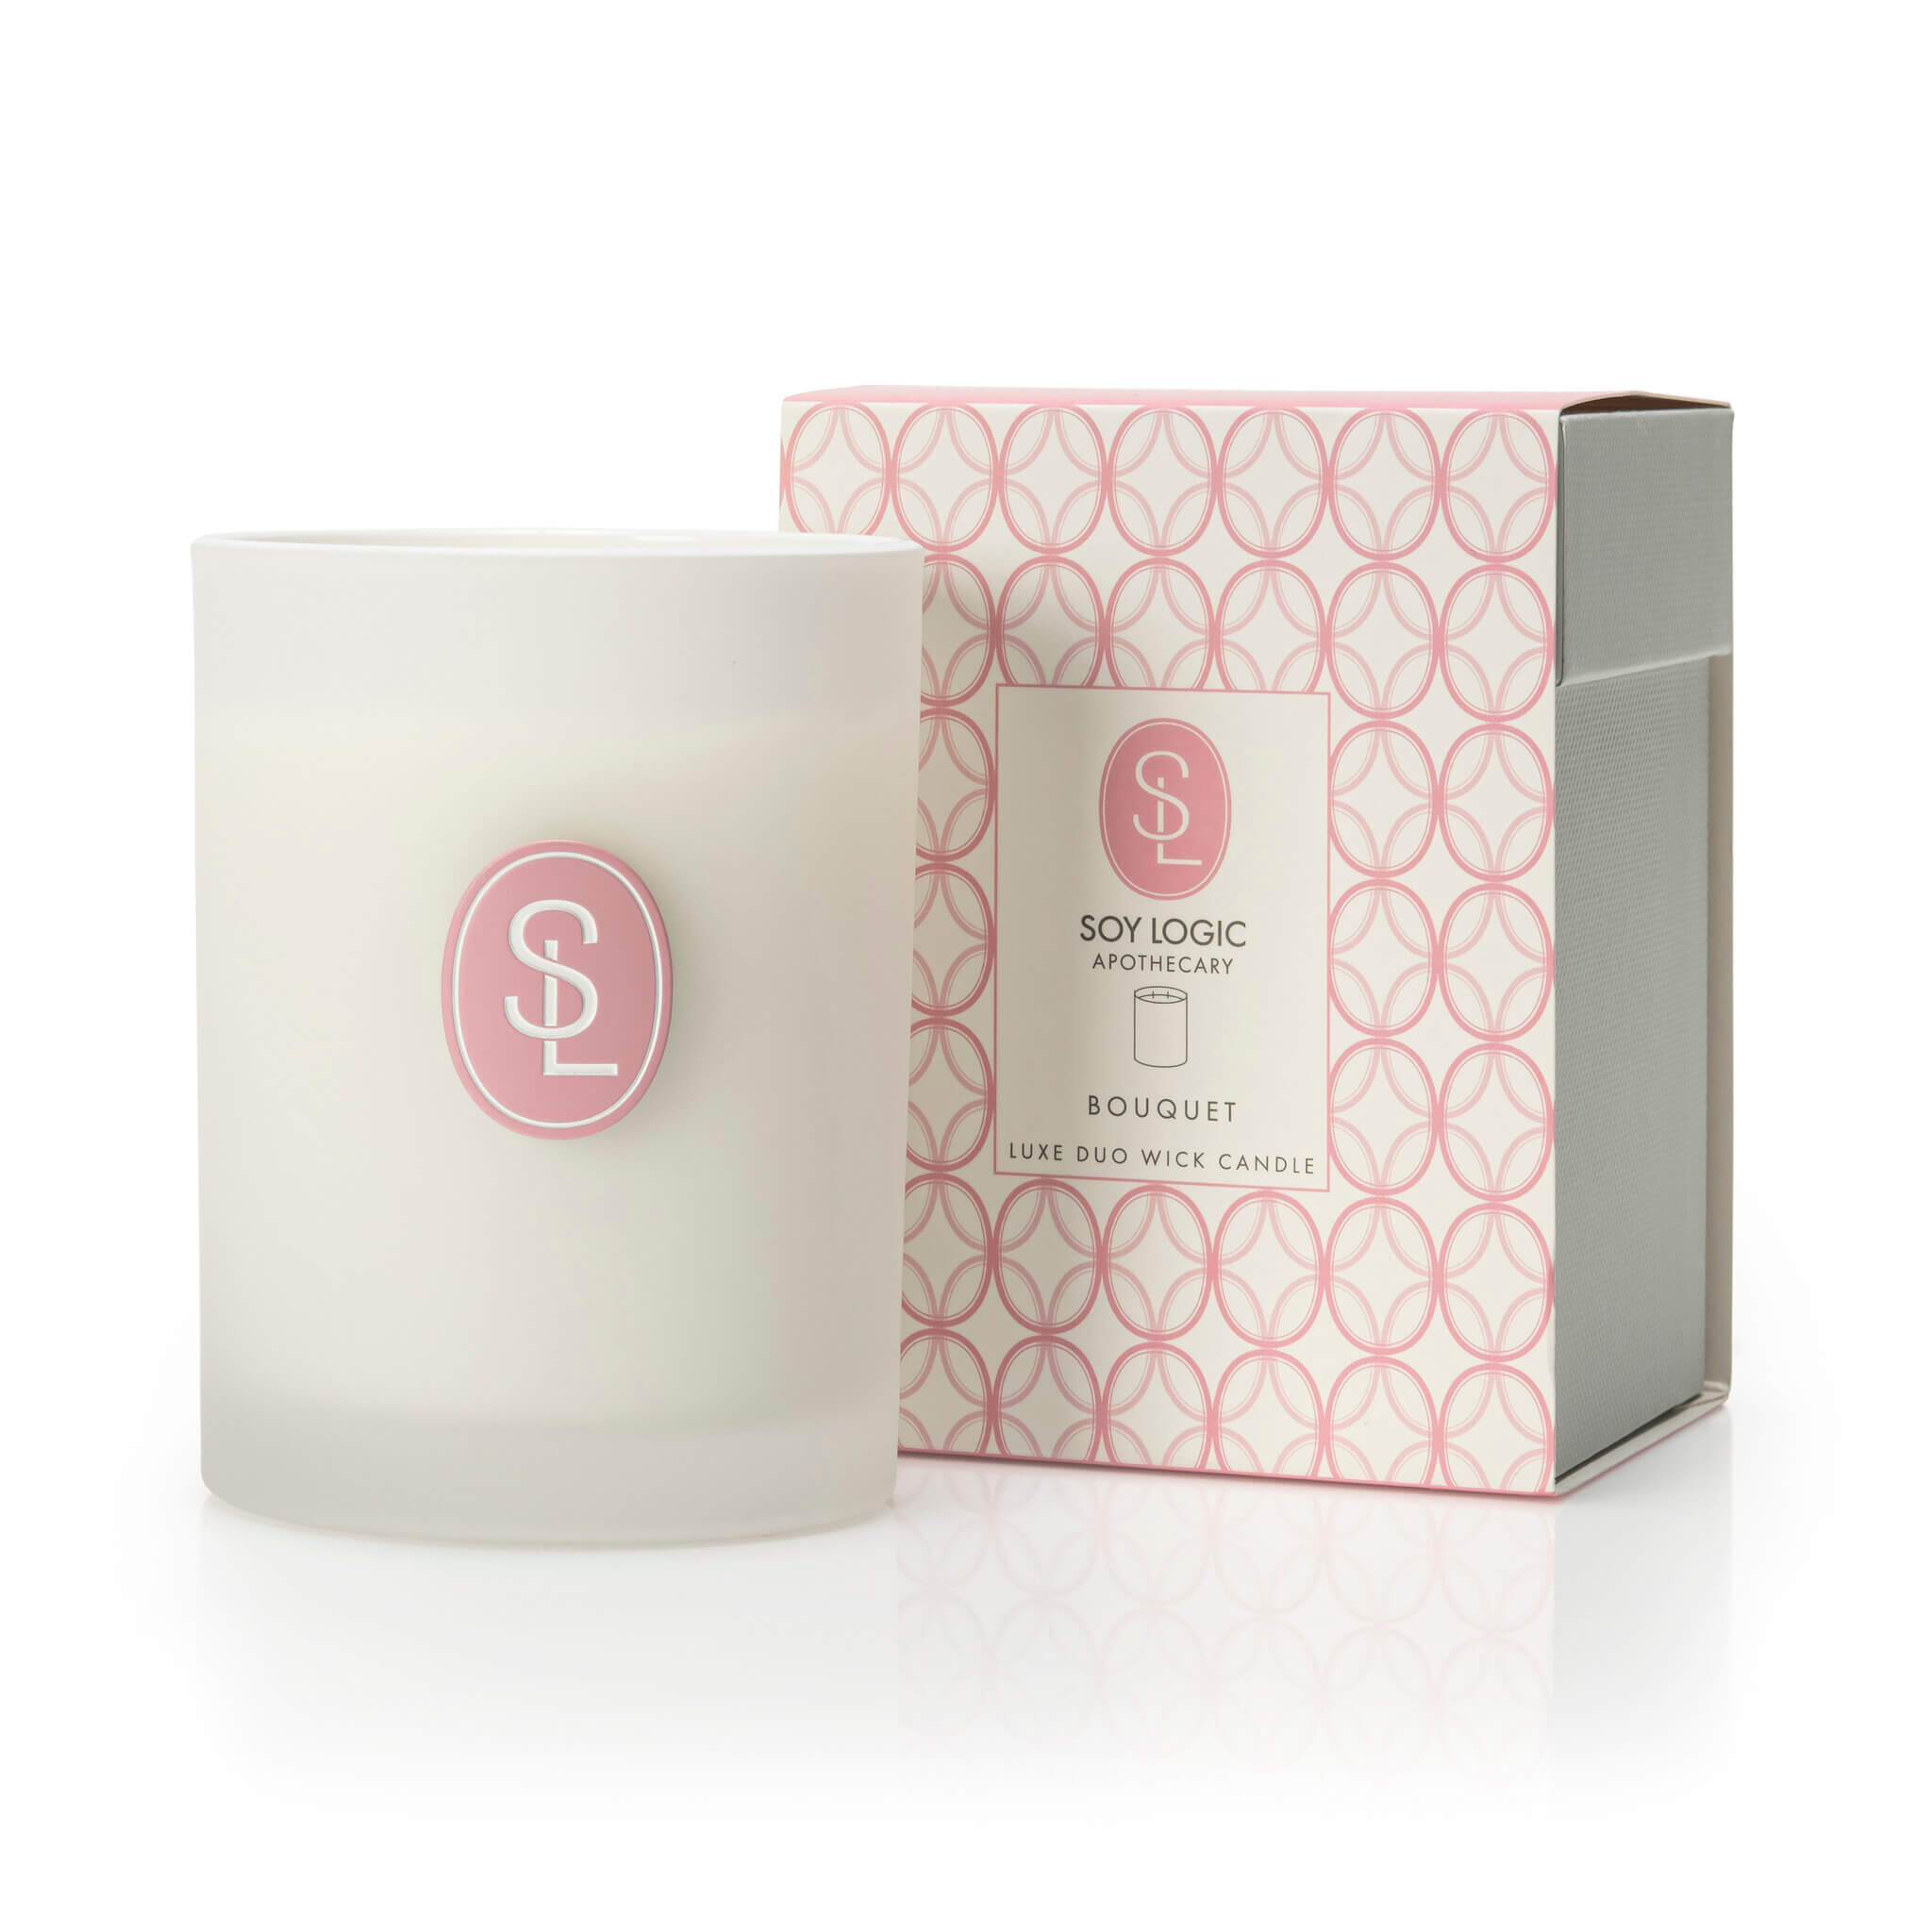 Bouquet Classic Duo Wick Candle